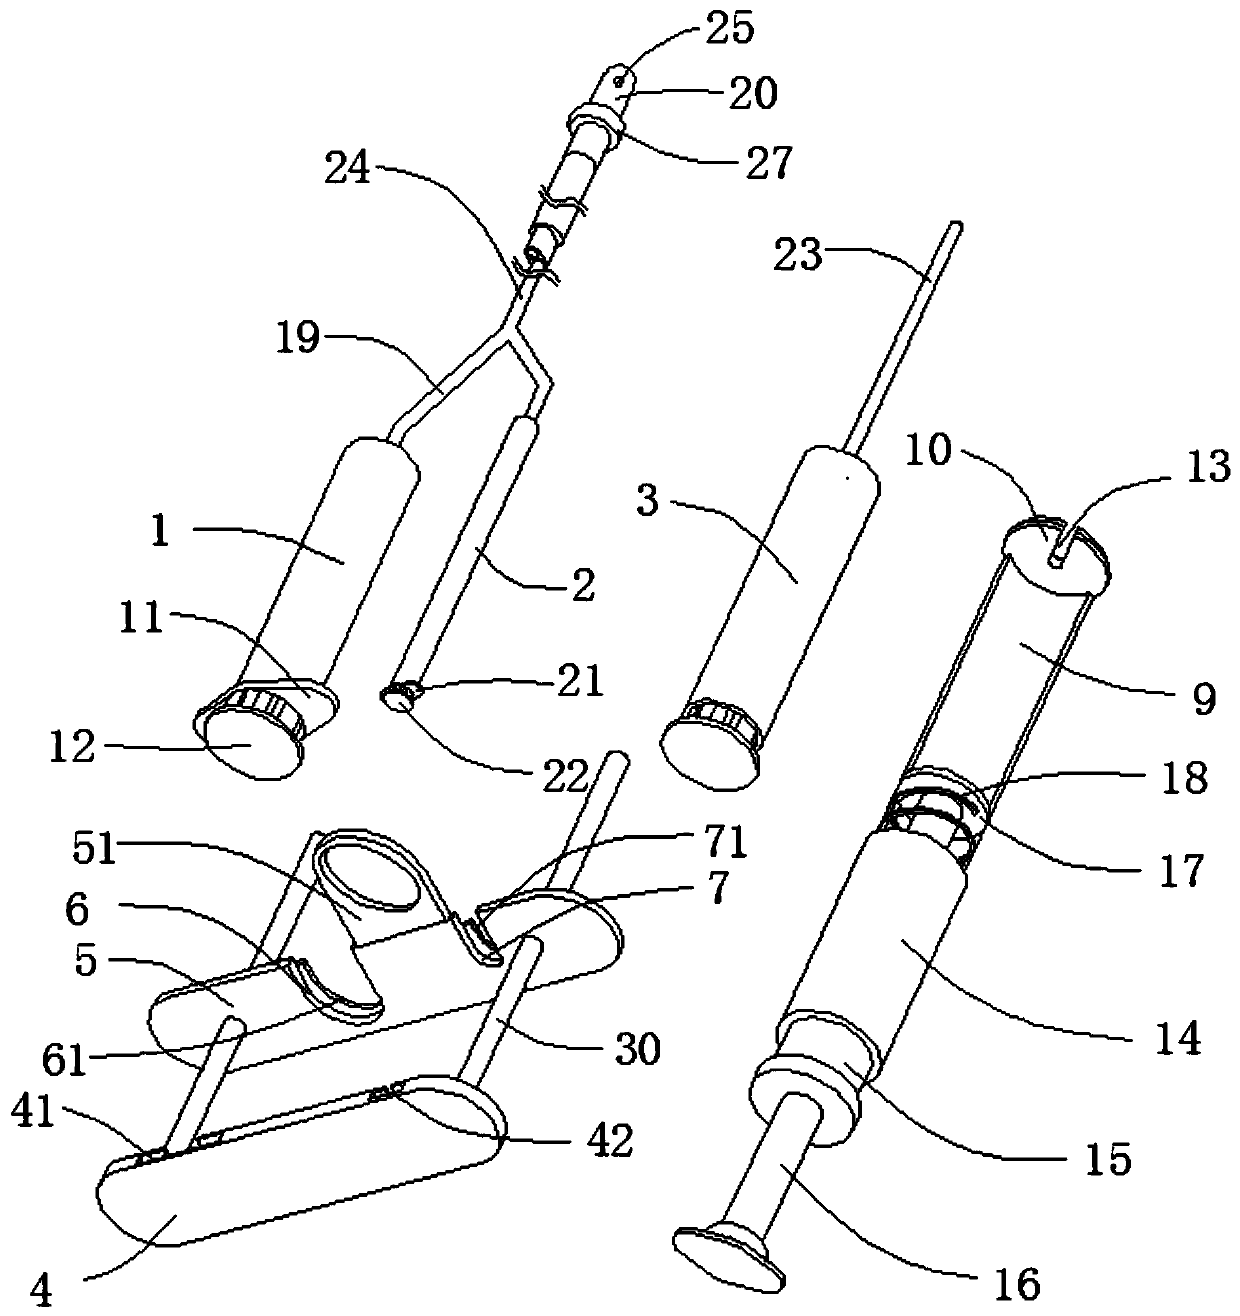 Device for stuffing human body tissue sinus tract with platelet-enriched plasma